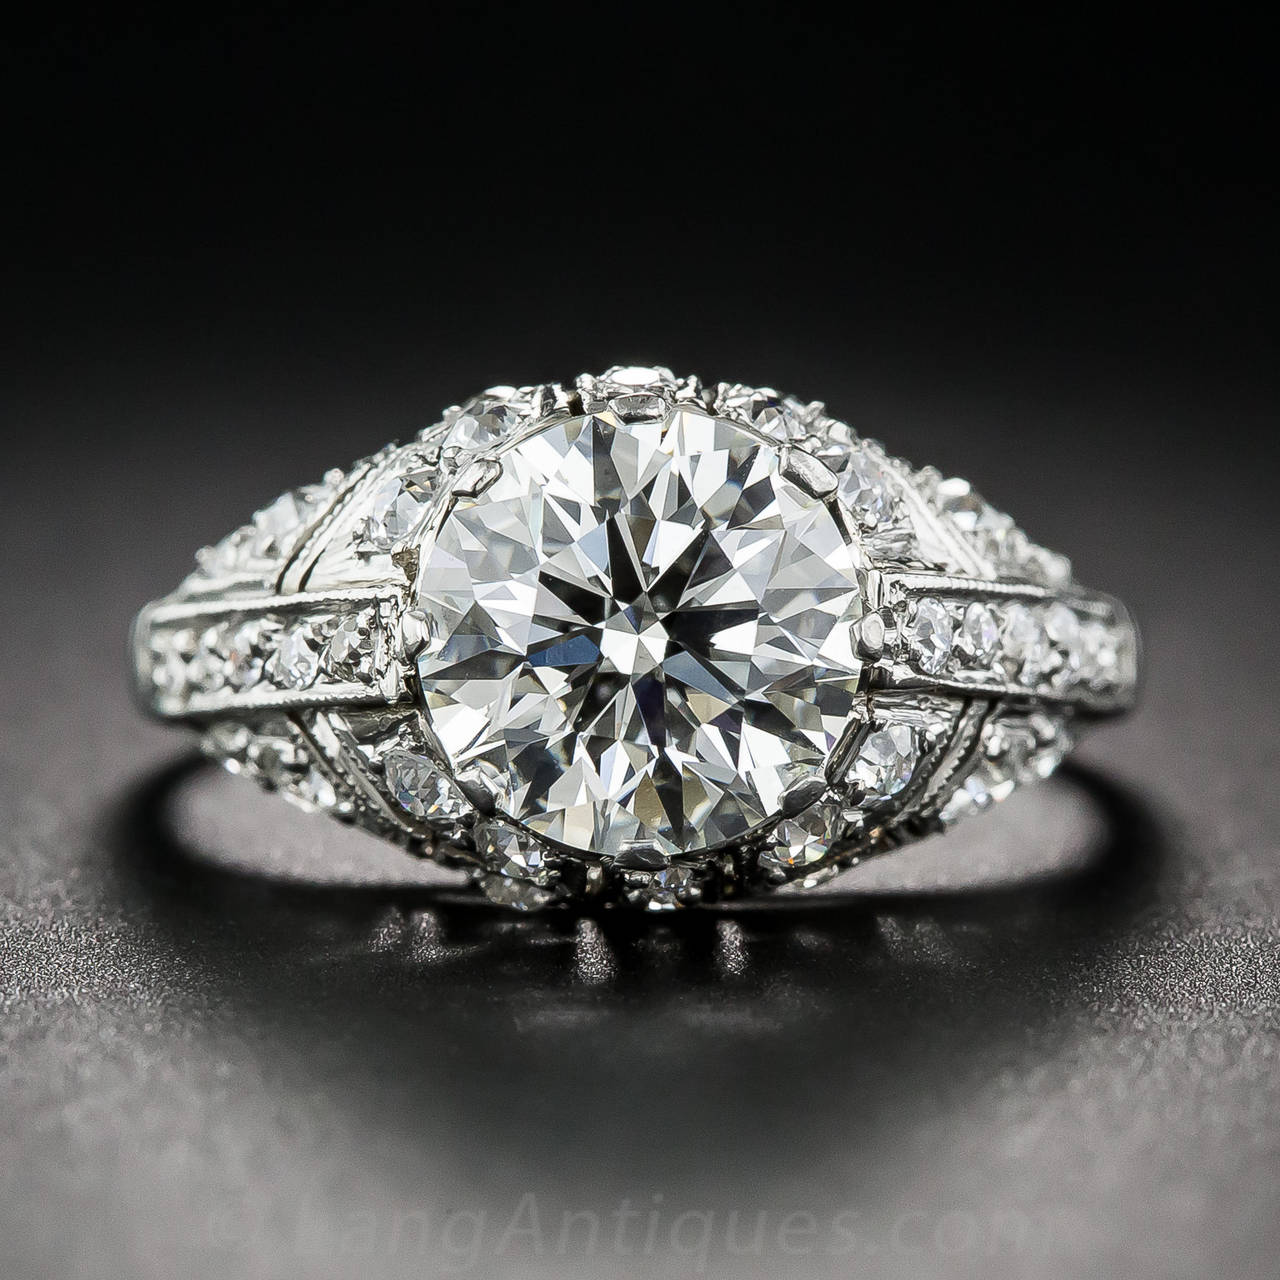 A bright and beautiful round brilliant-cut diamond, weighing 2.08 carats, is spectacularly displayed in this sparkling and sophisticated, high-profile mounting, hand fabricated in platinum , in faithful emulation of enduring 1920s Art Deco style.